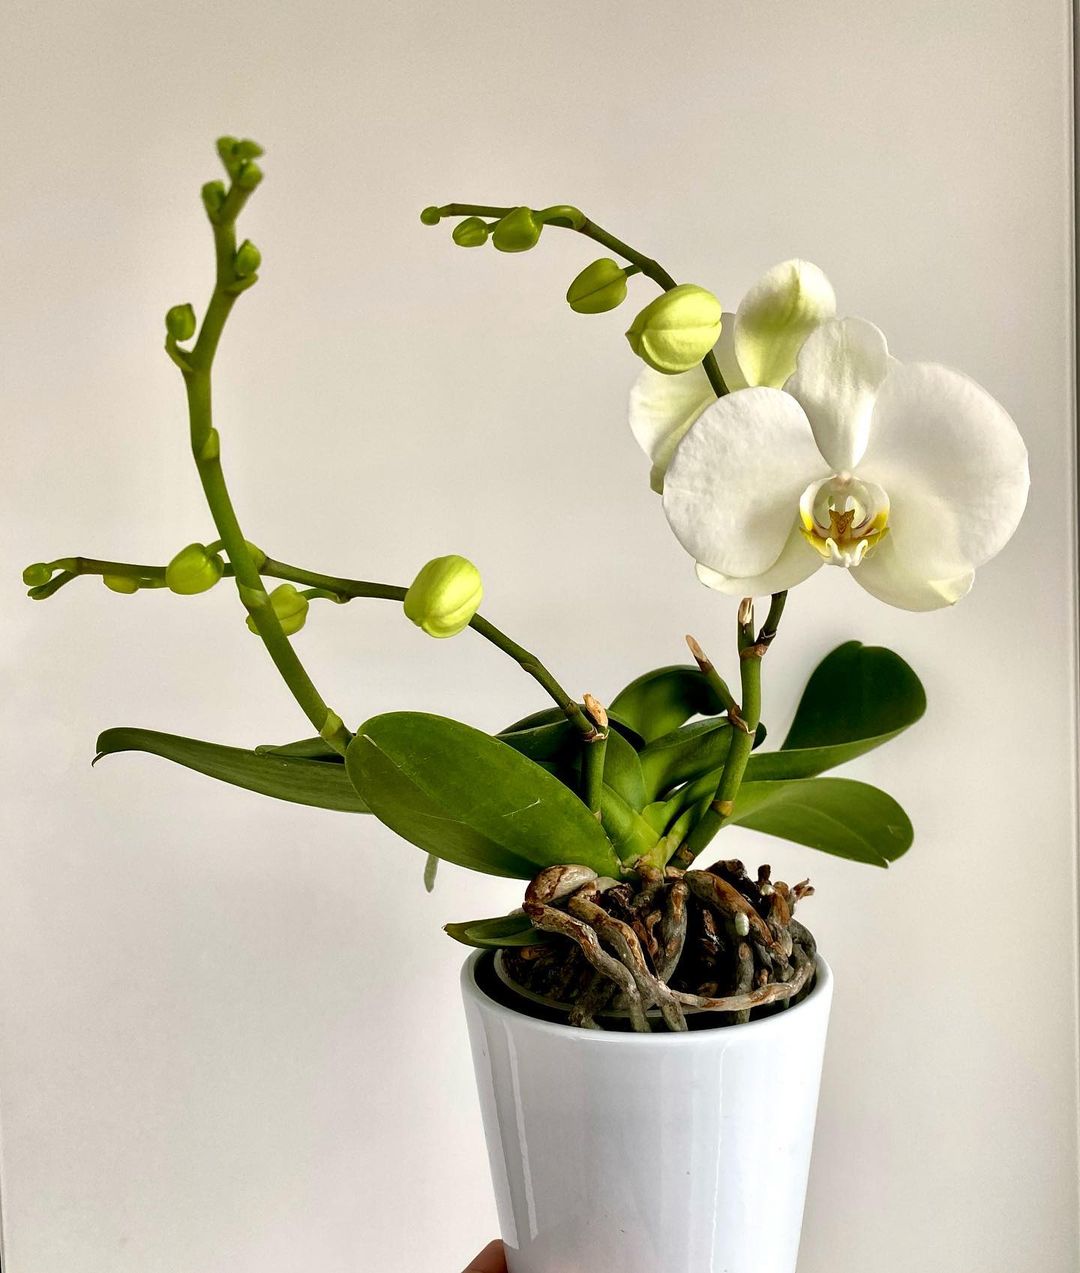 Personalized Phalaenopsis Orchid Care: Water, Light, Nutrients | Greg App